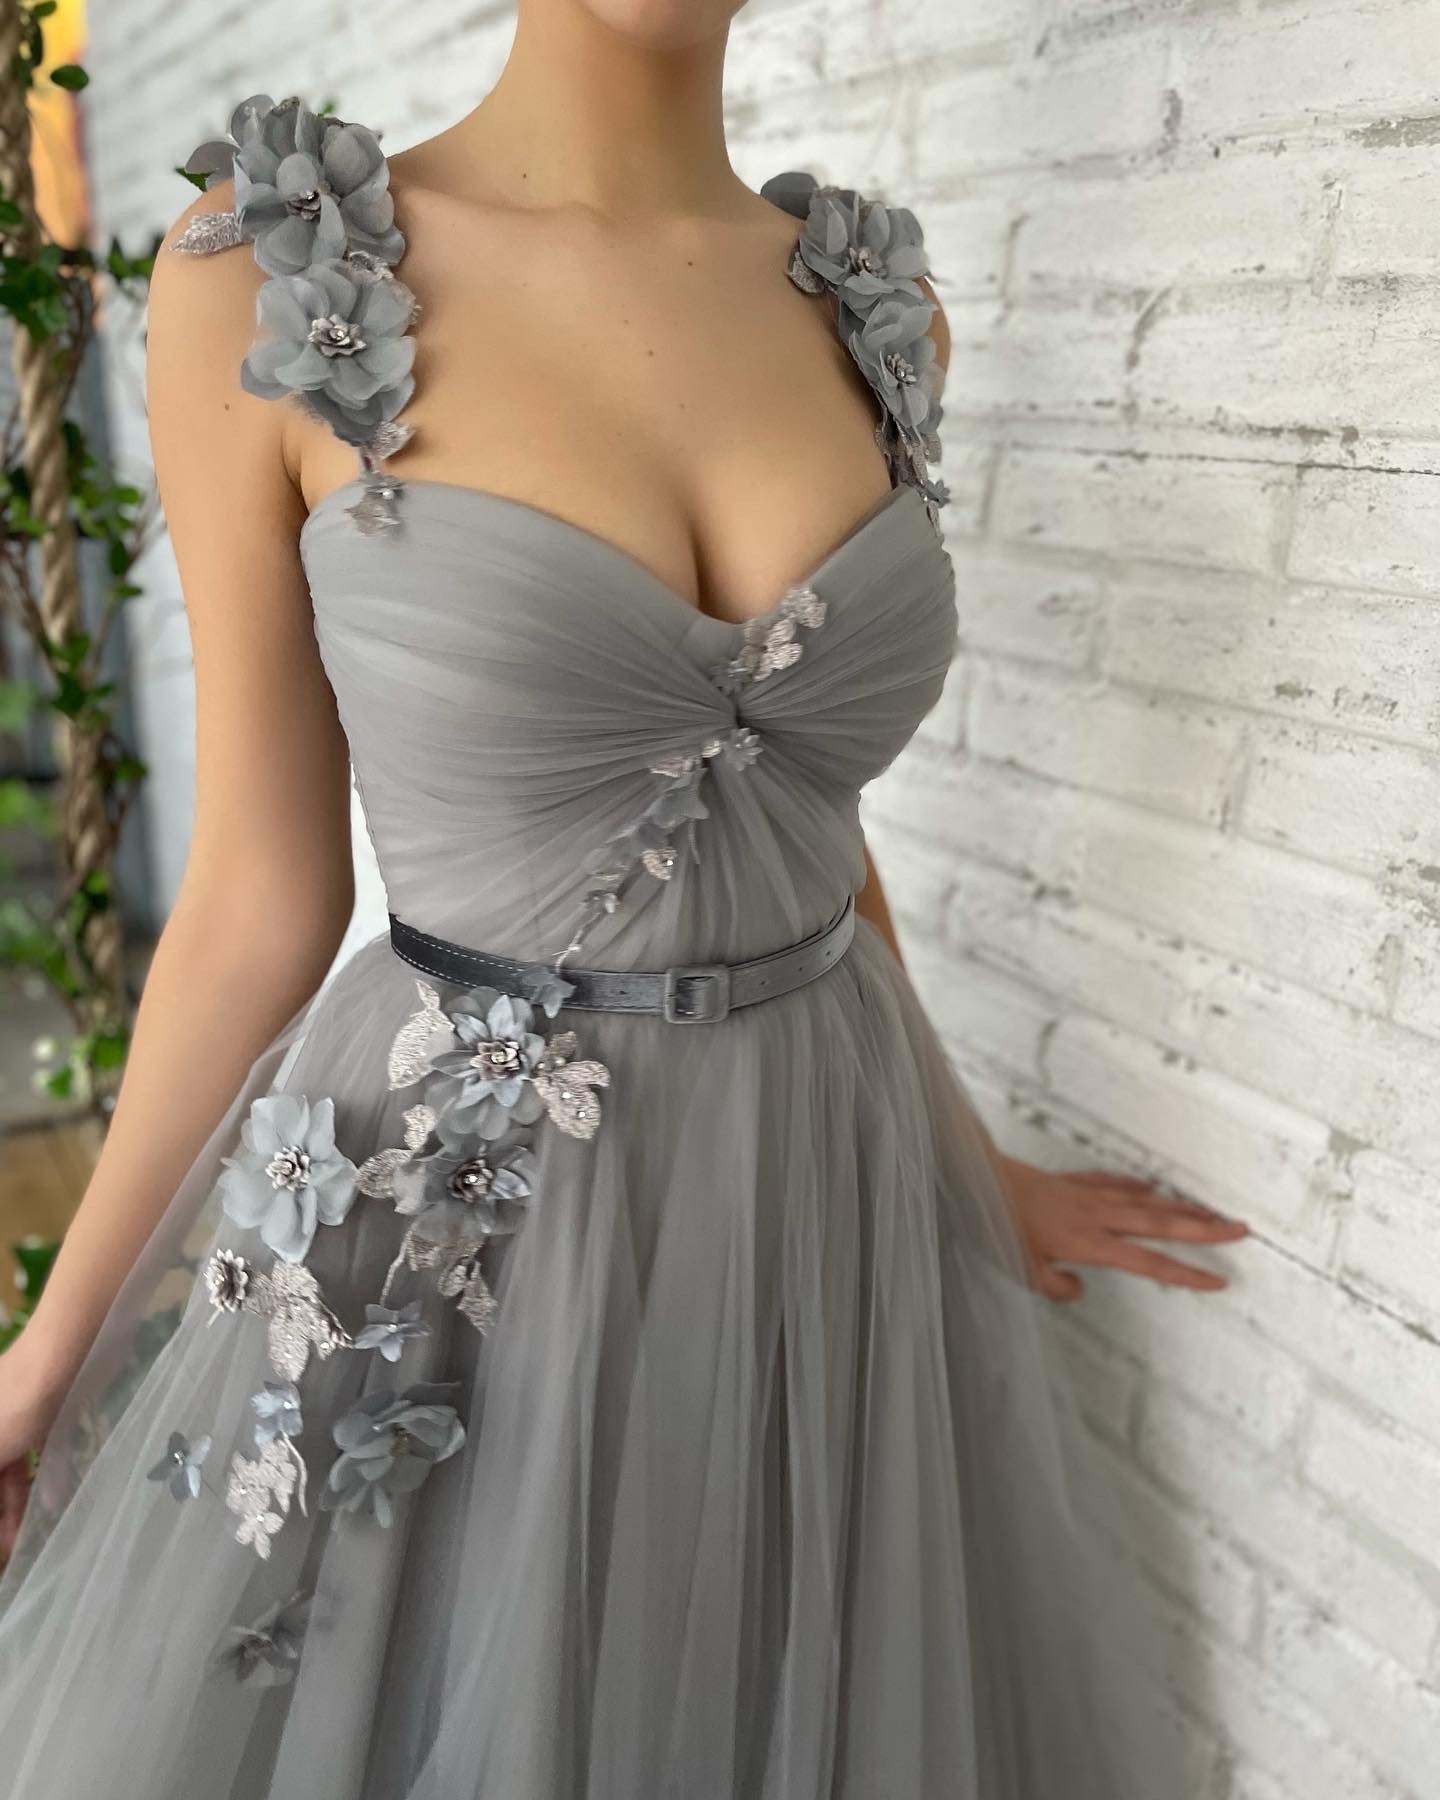 Grey midi dress with spaghetti straps, belt and embroidery